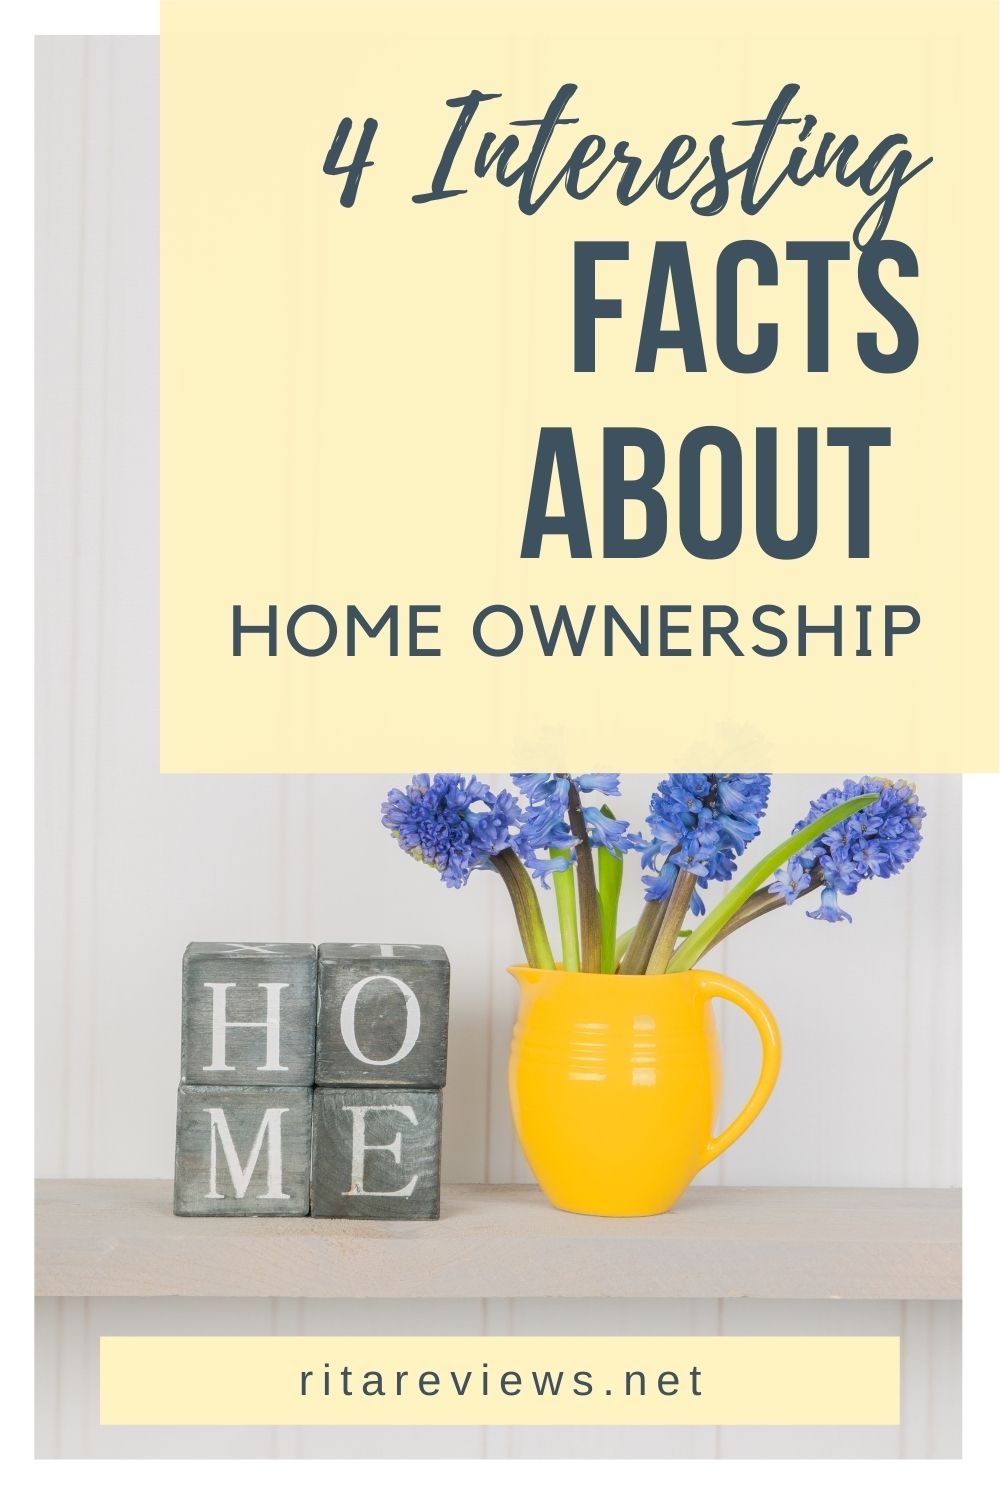 4 Interesting Facts About Home Ownership That You Should Know